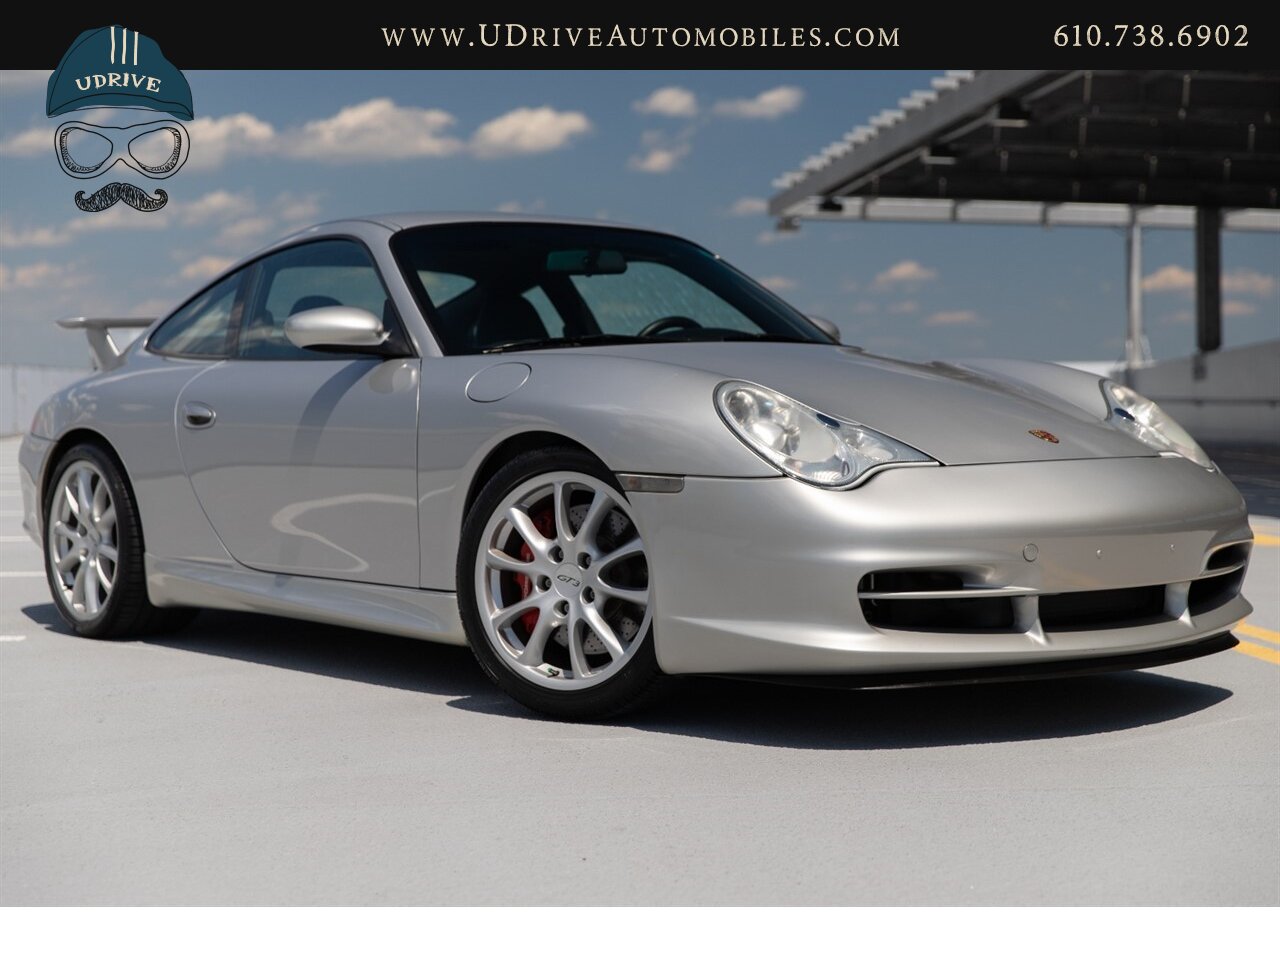 2004 Porsche 911 GT3 18k Miles Sport Seats Painted Hardback Seats  Thicker Steering Wheel Xenon Headlamps - Photo 5 - West Chester, PA 19382